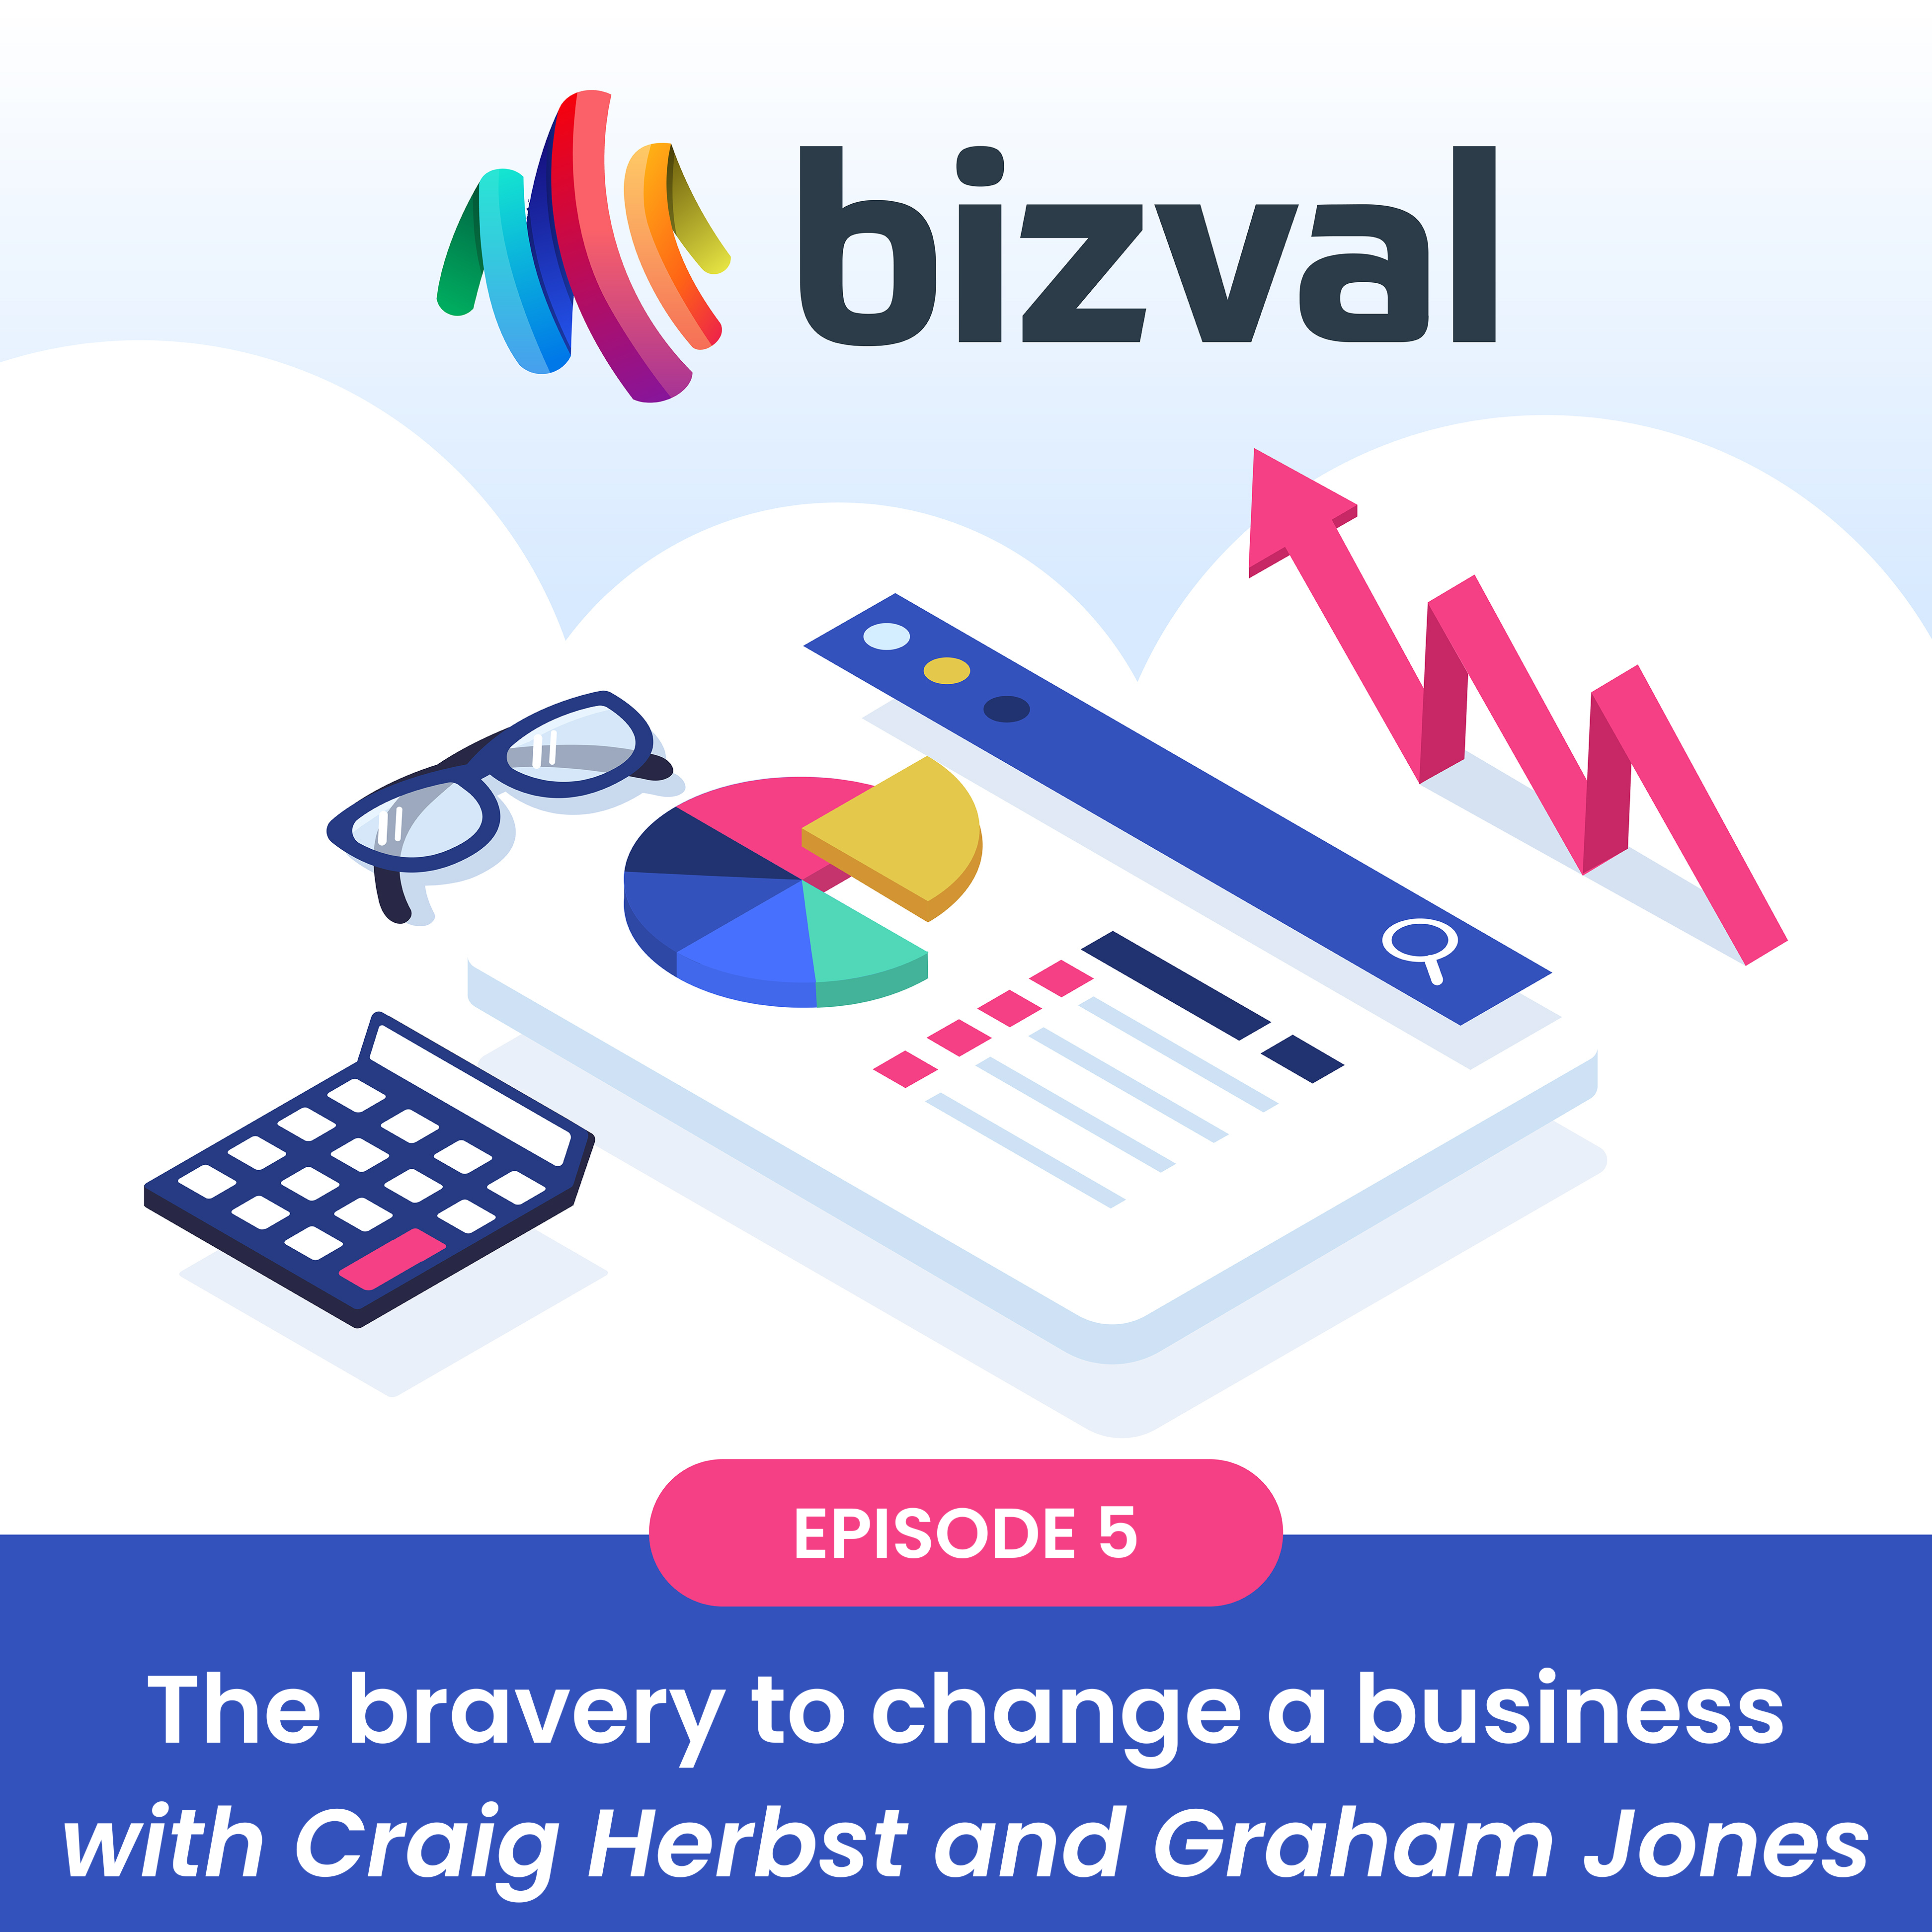 We value your company #5: The bravery to change a business (with Craig Herbst and Graham Jones)